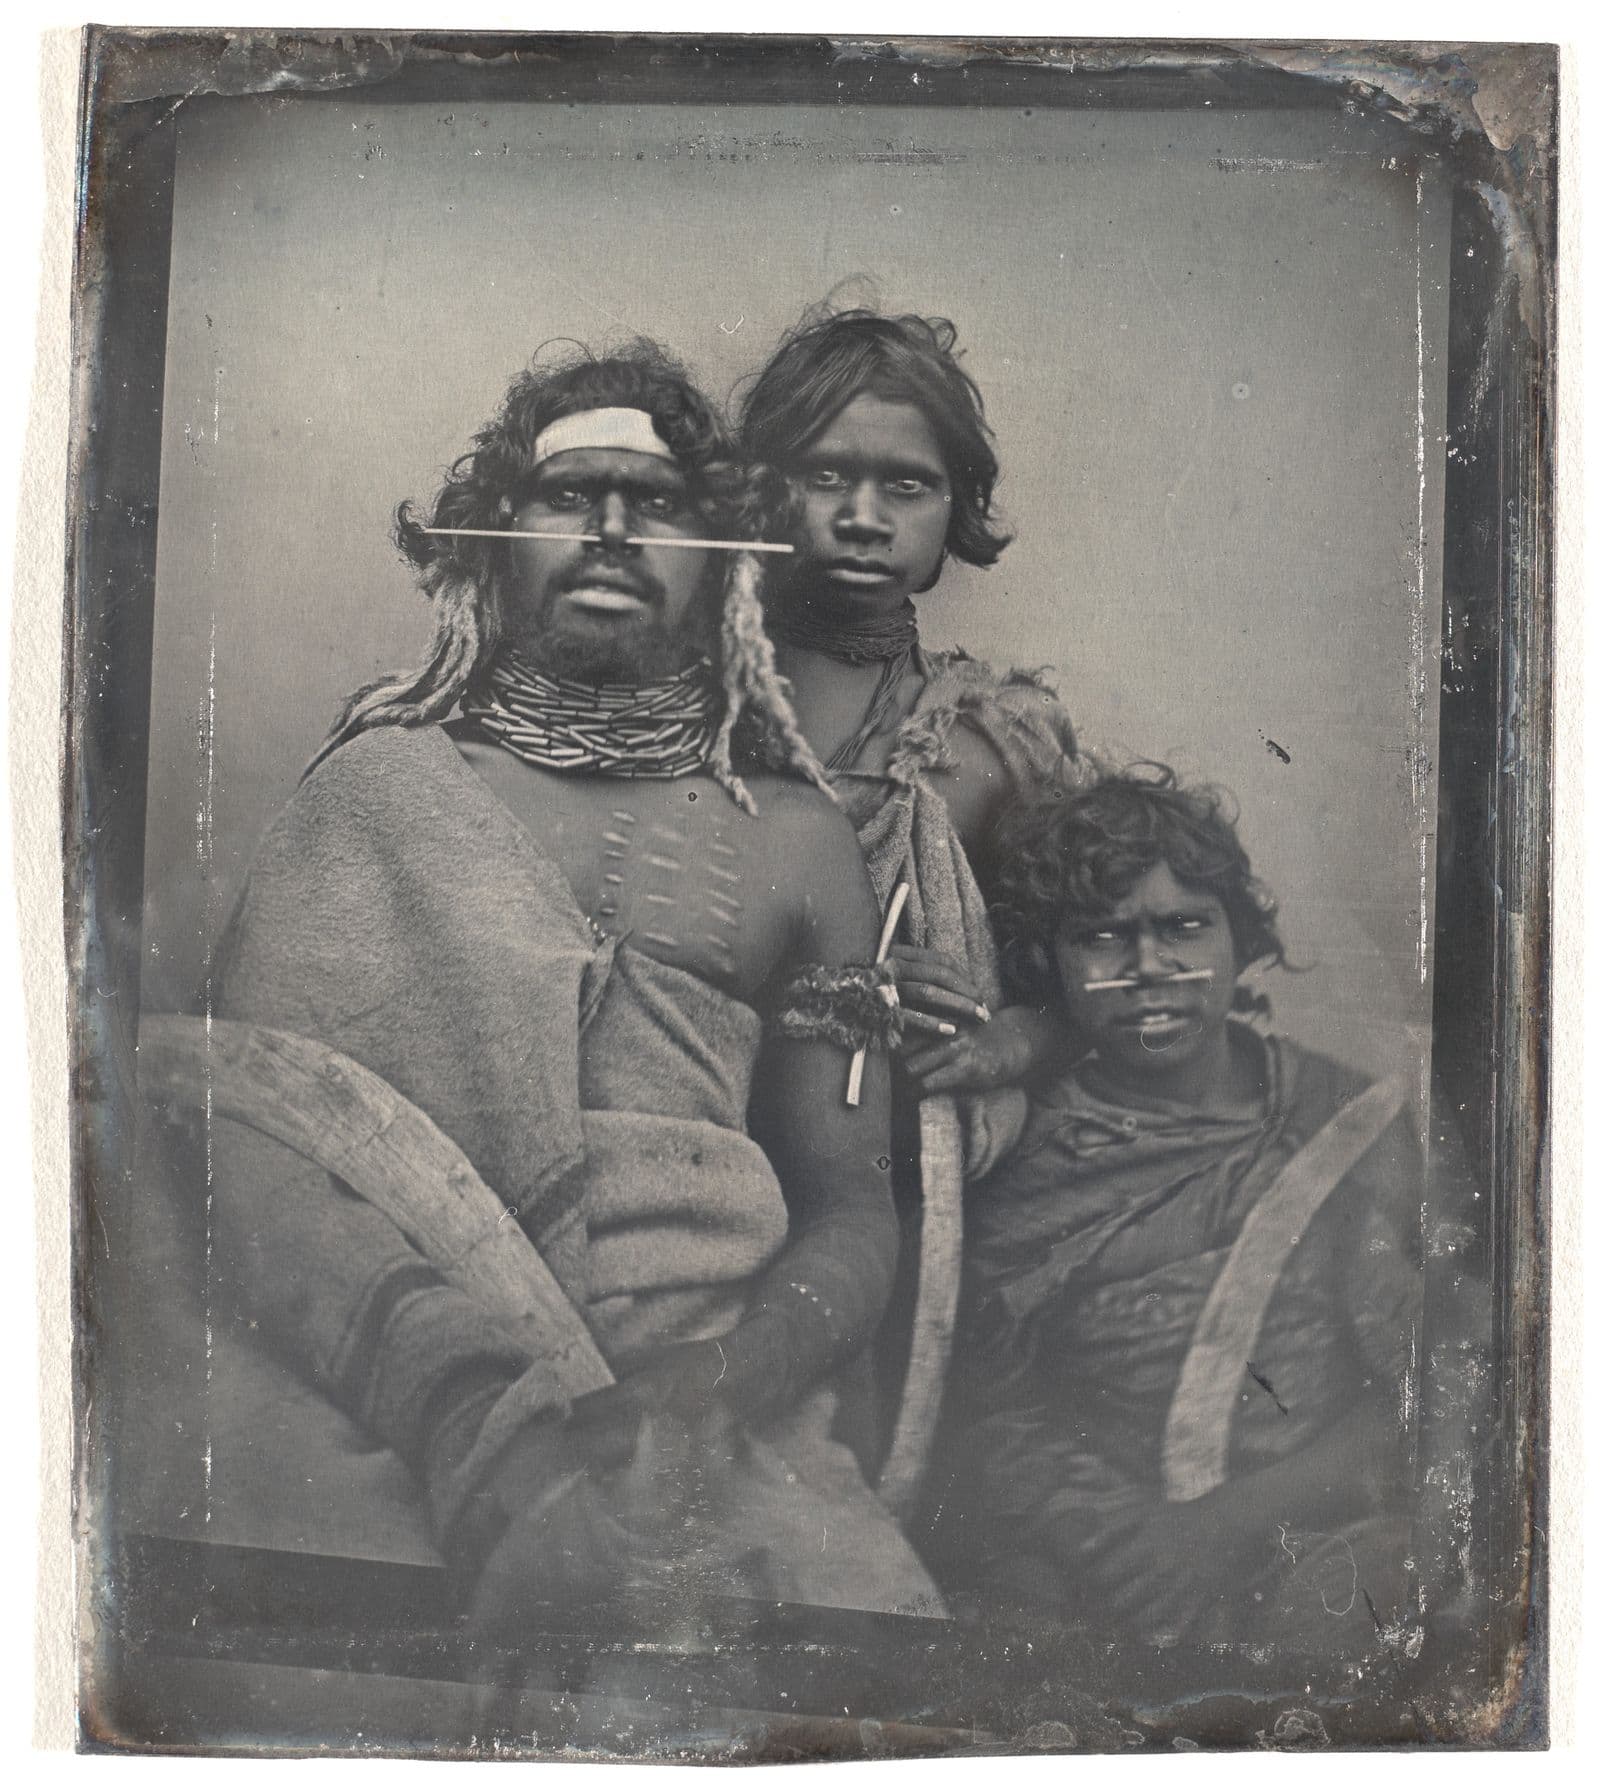 Photograph of an Indigenous Australian man in traditional dress and two younger children also in traditional clothing